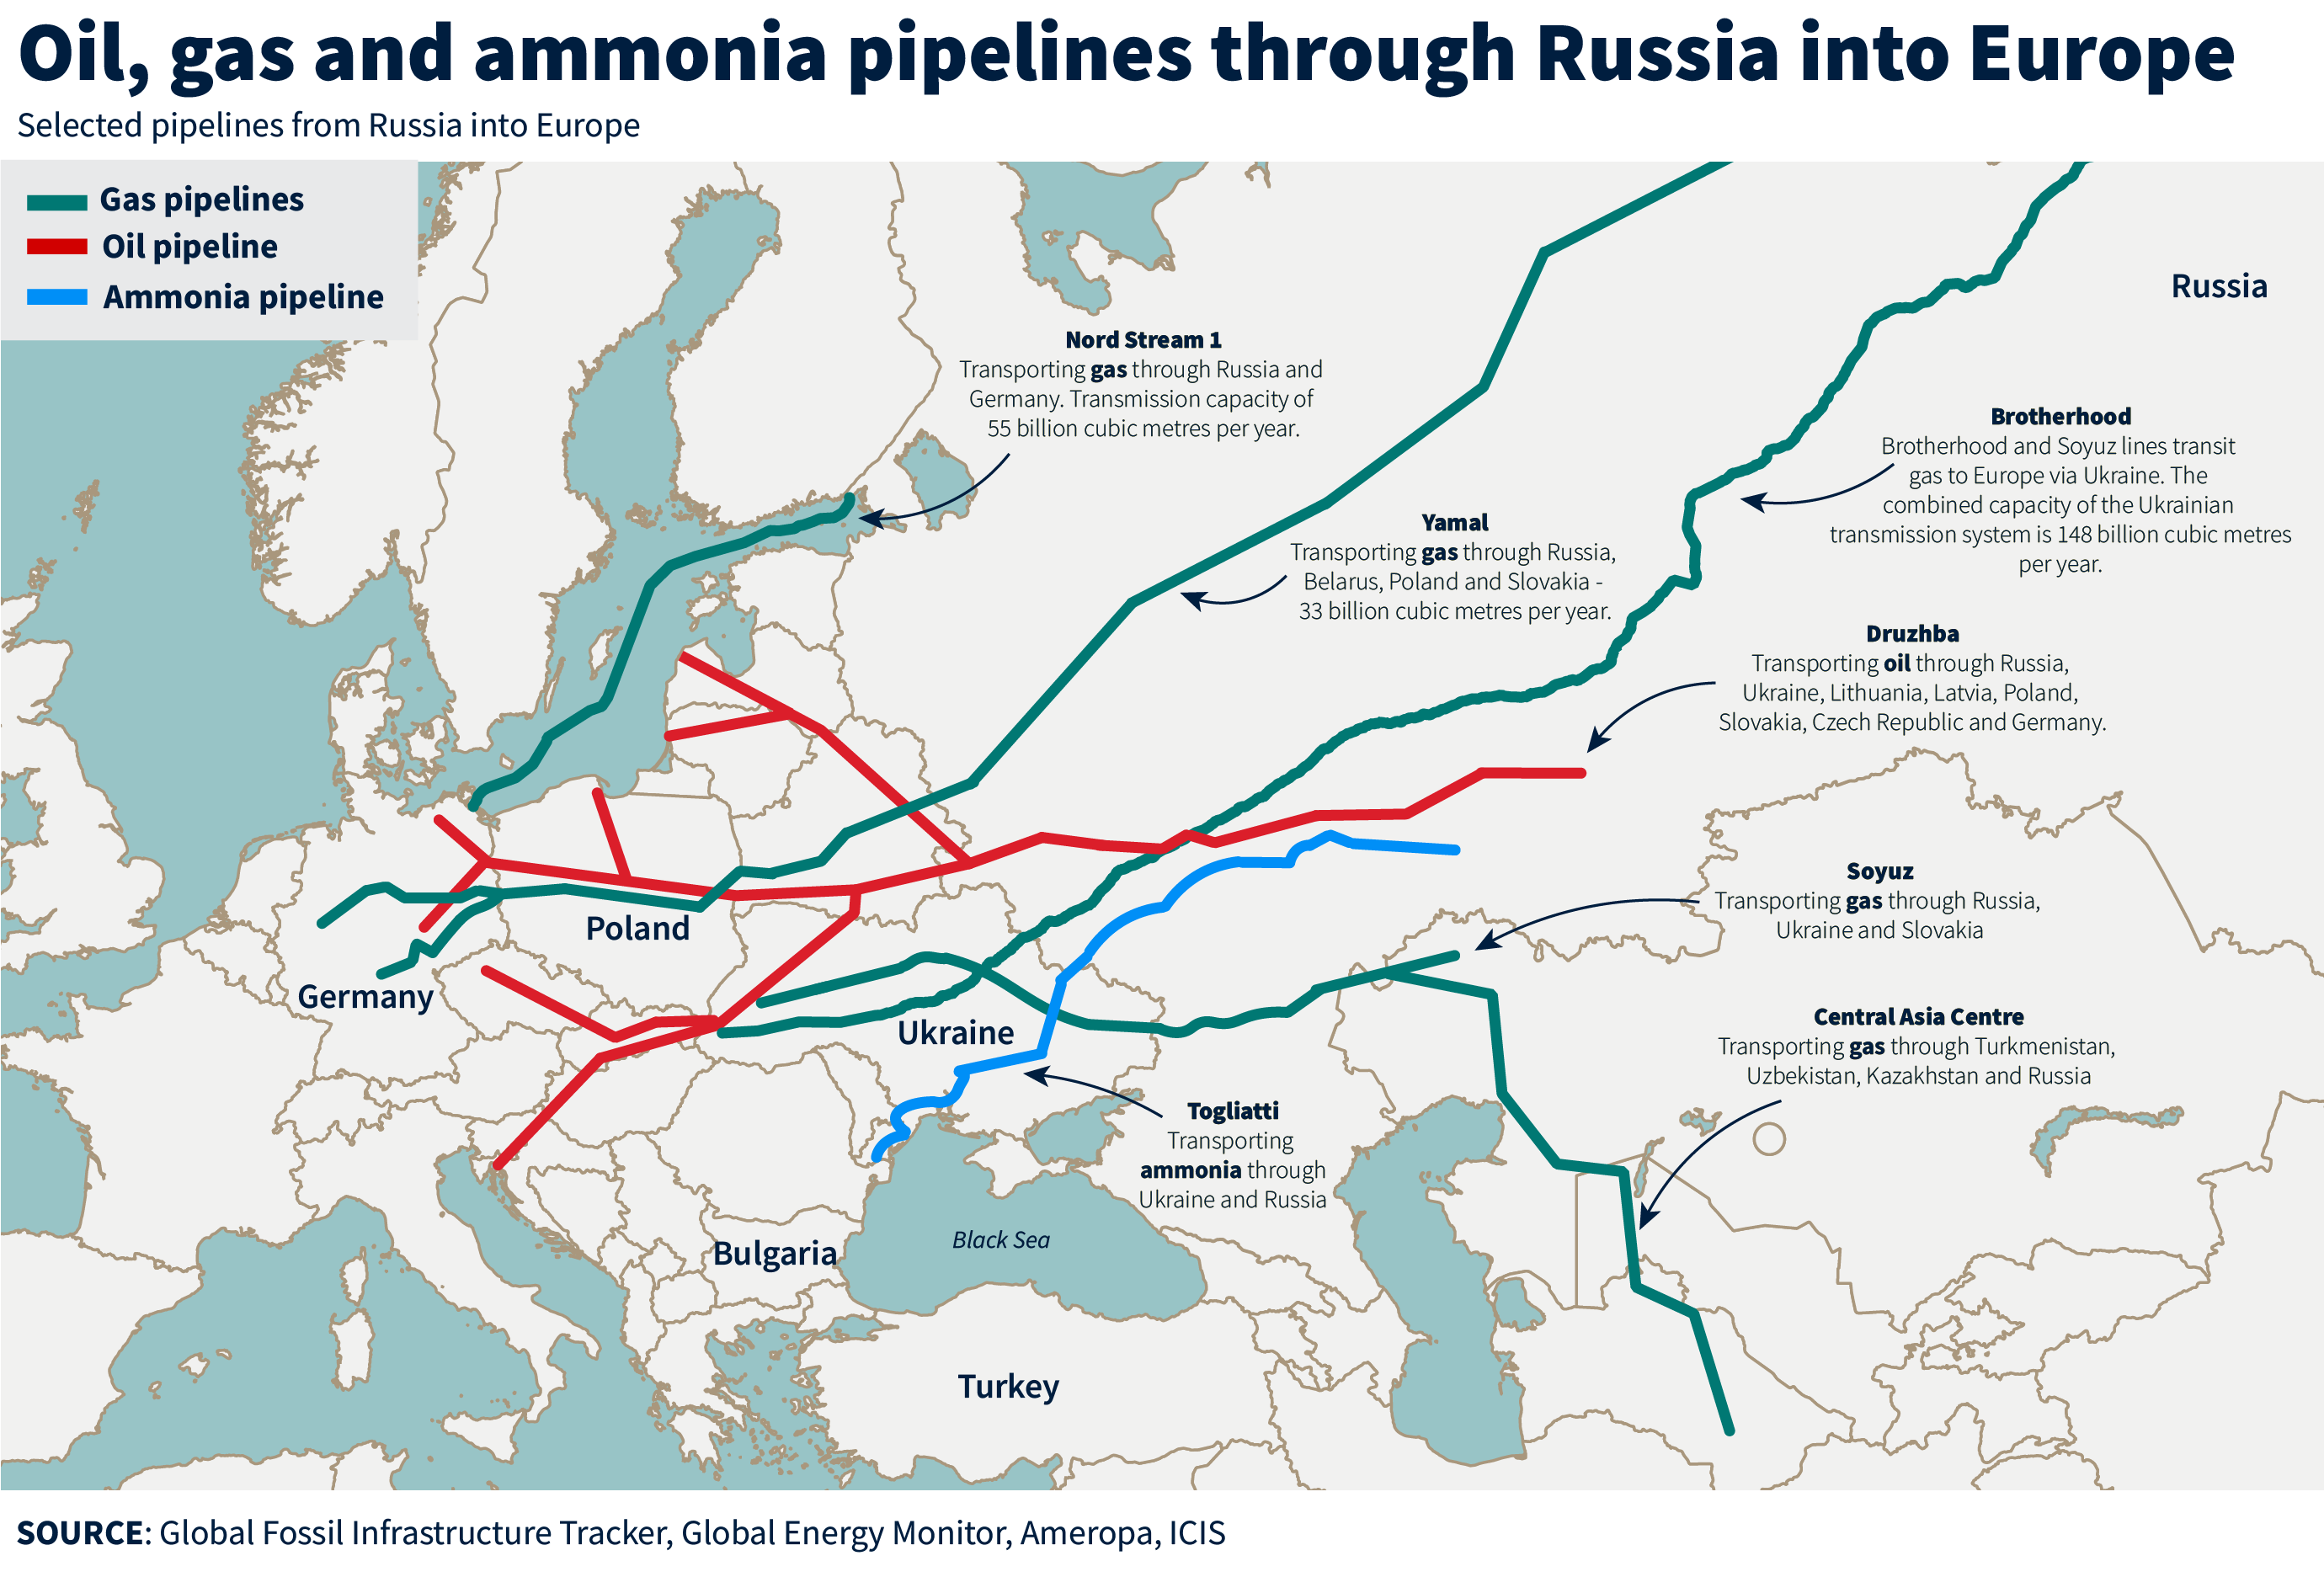 How vulnerable are energy and energy-related Russian supplies to disruptions?